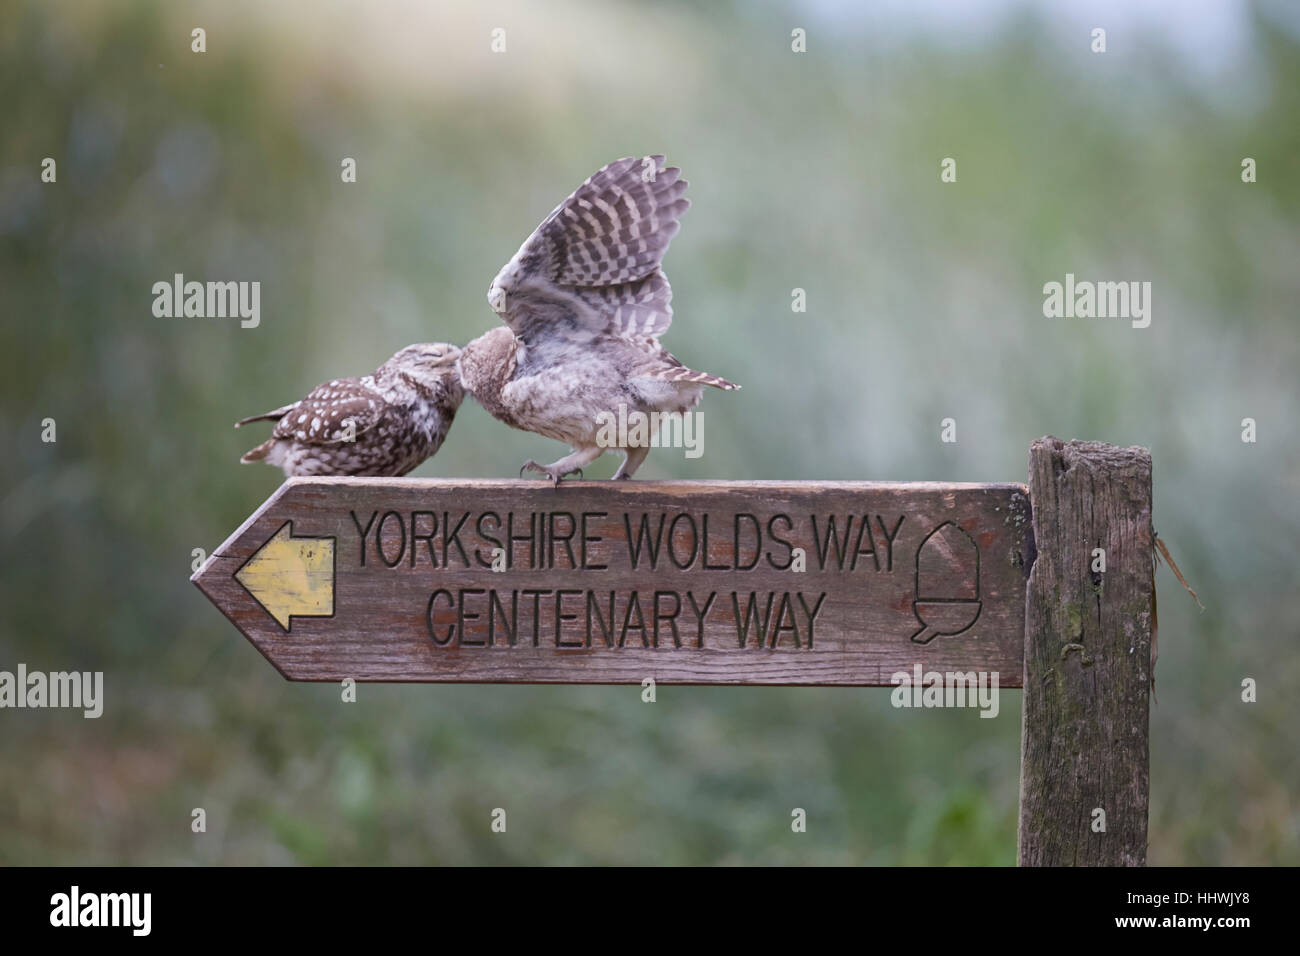 Little Owl, Athene noctua, feeding owlet perched on a Yorkshire Wolds Way Centenary Way wooden sign post, East Yorkshire, UK. Stock Photo